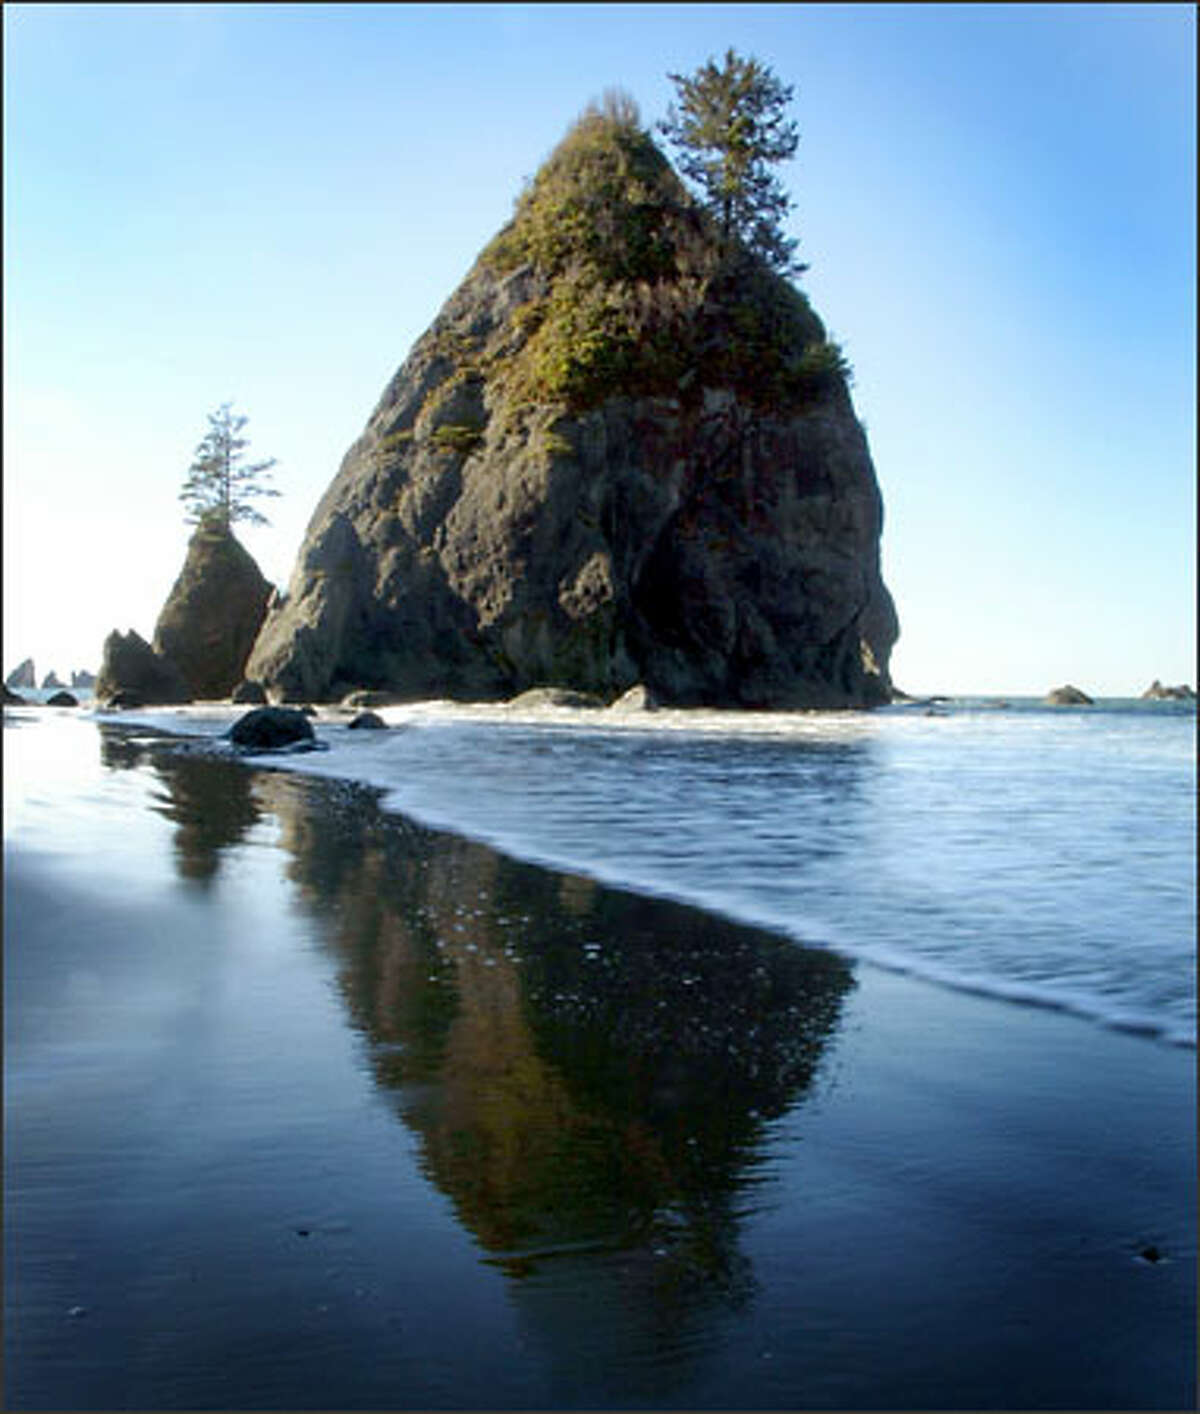 Sea stacks punctuate the rugged coastline at Point of the Arches on Shi Shi Beach.